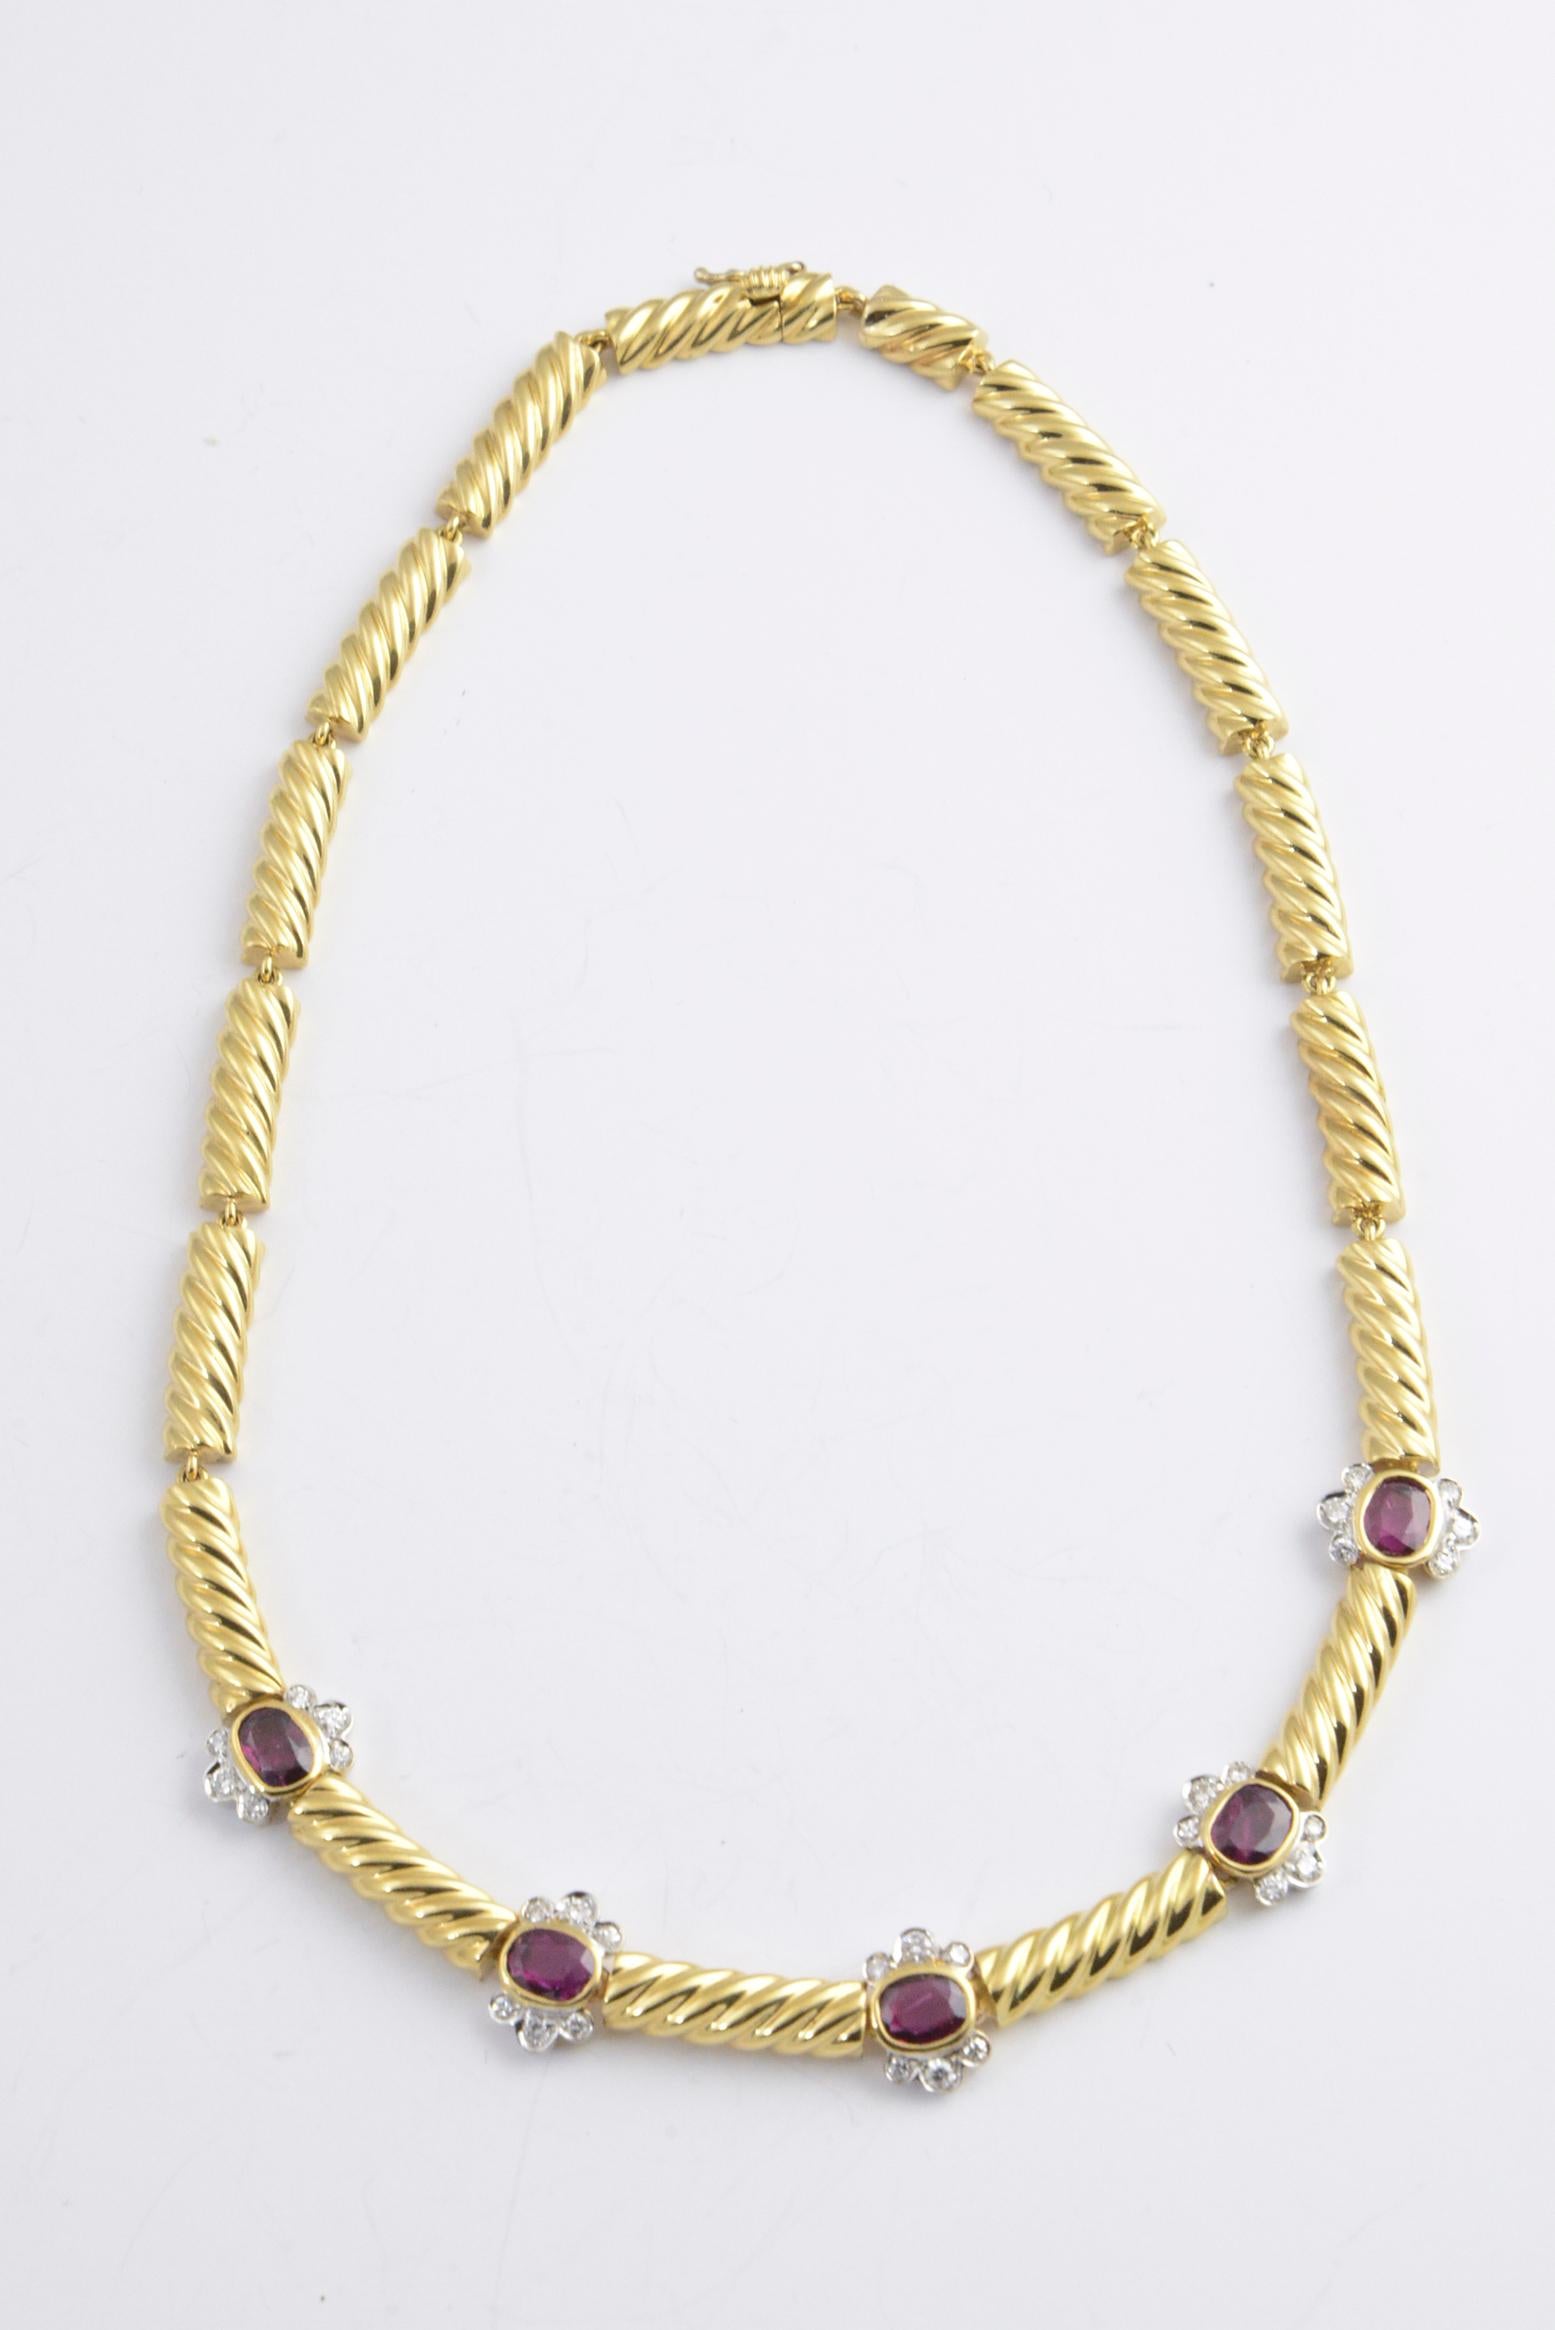 1980s Italian 18K yellow gold necklace set with rubies. Each ruby is surrounded by six diamonds. Diamonds, .02 carats each. Marked: 18K Italy.

There is a matching ring and necklace sold separately.  There is a picture so you can view full set.
